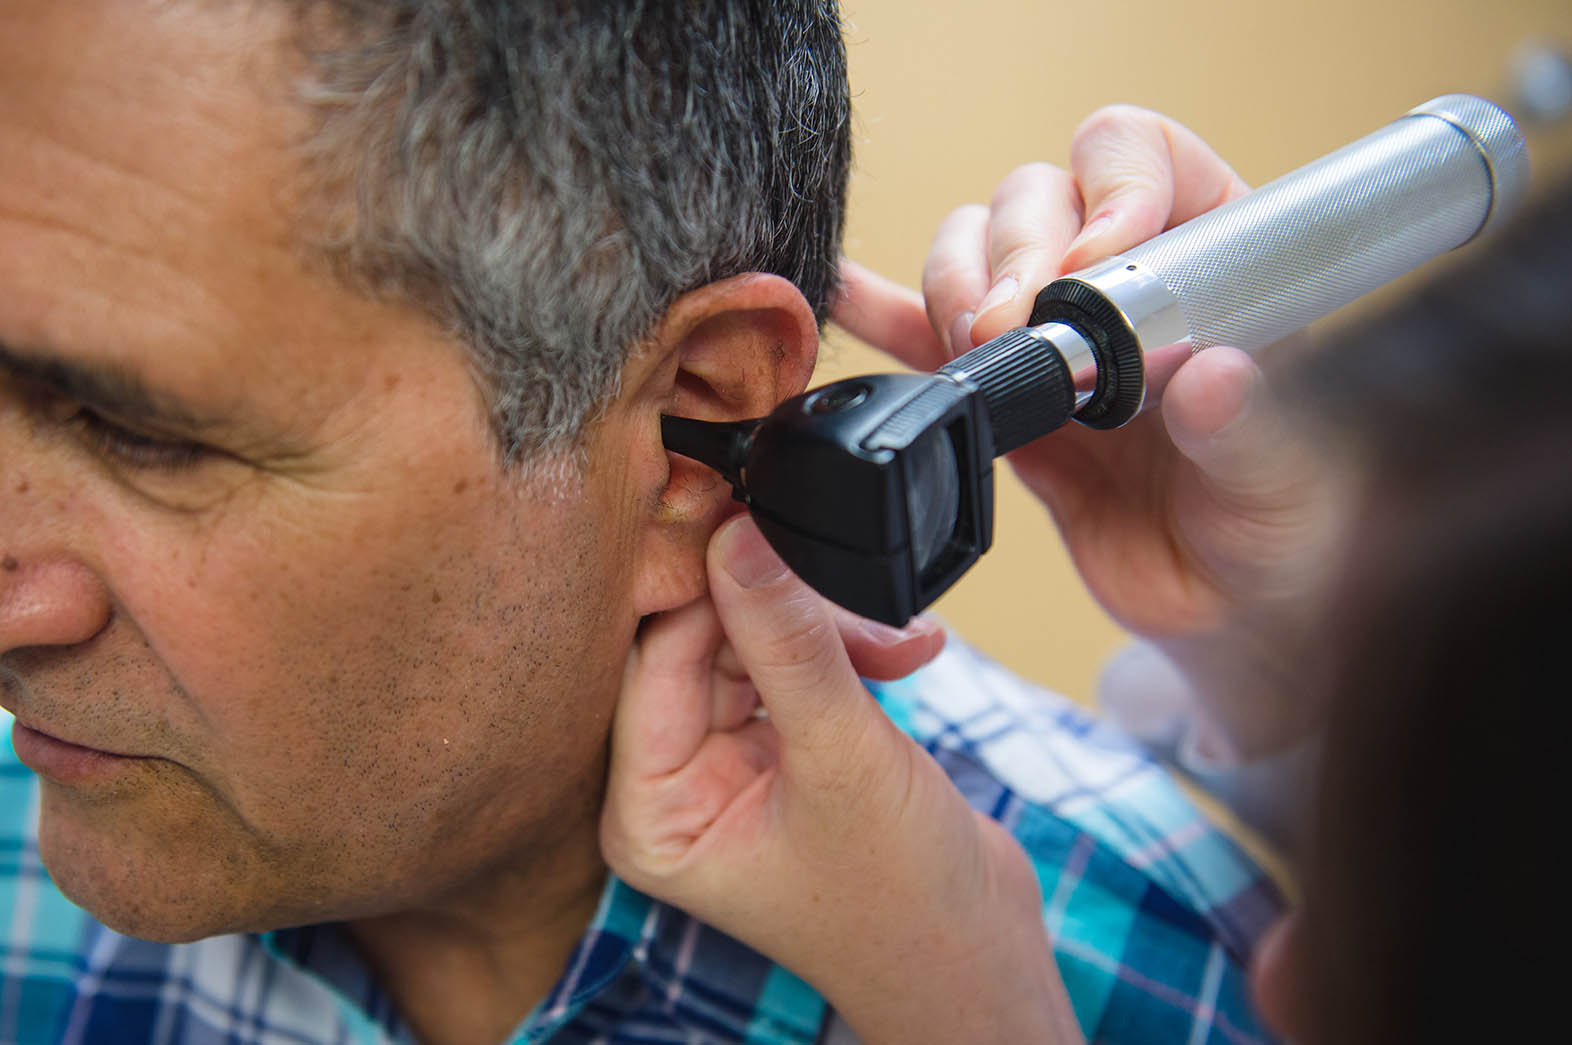 ENT specialist treating a perforated eardrum at Scottsdale Ear, Nose & Throat